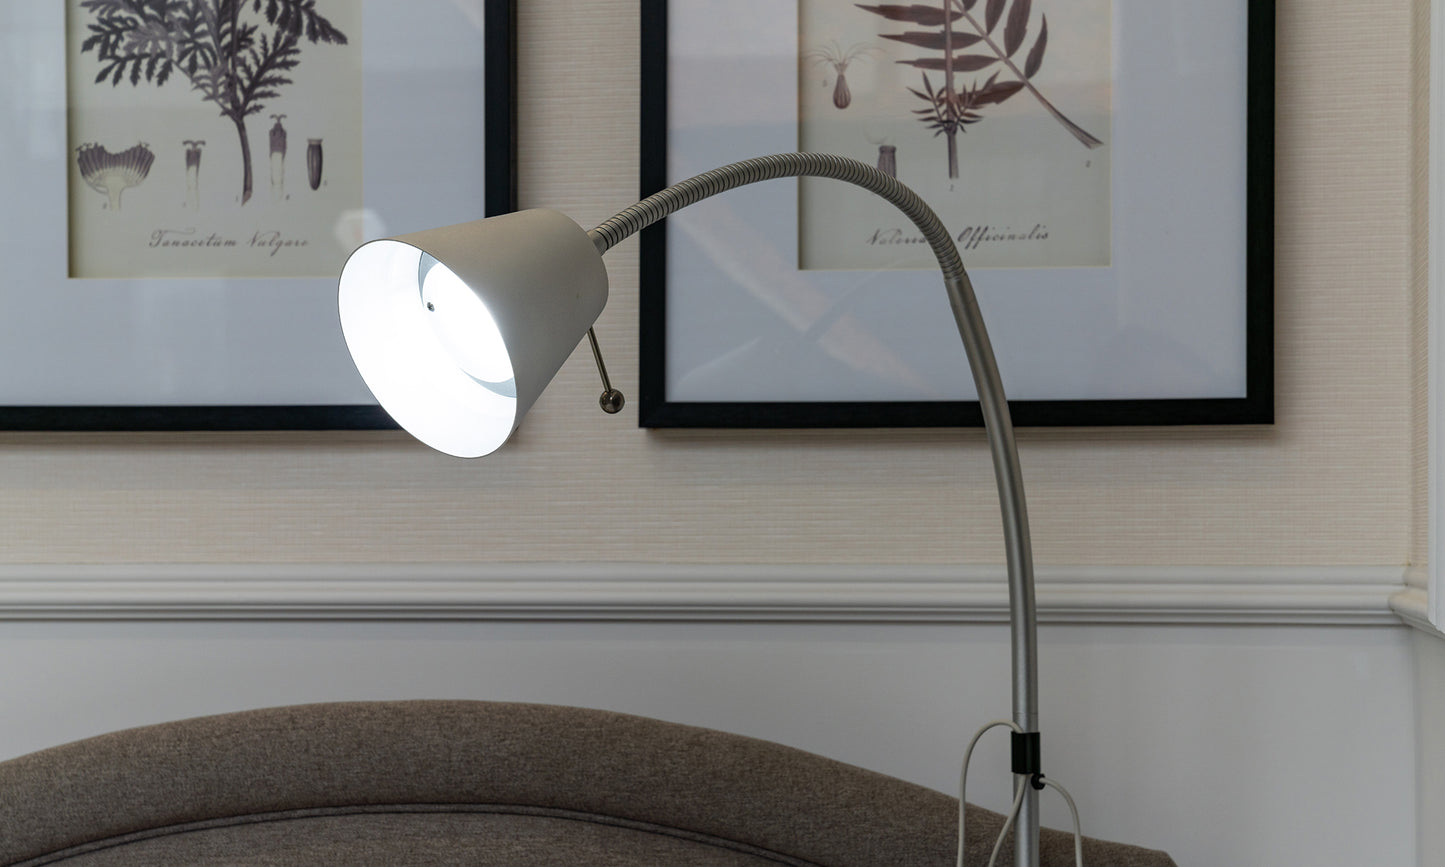 Overbed reading lamp switched on